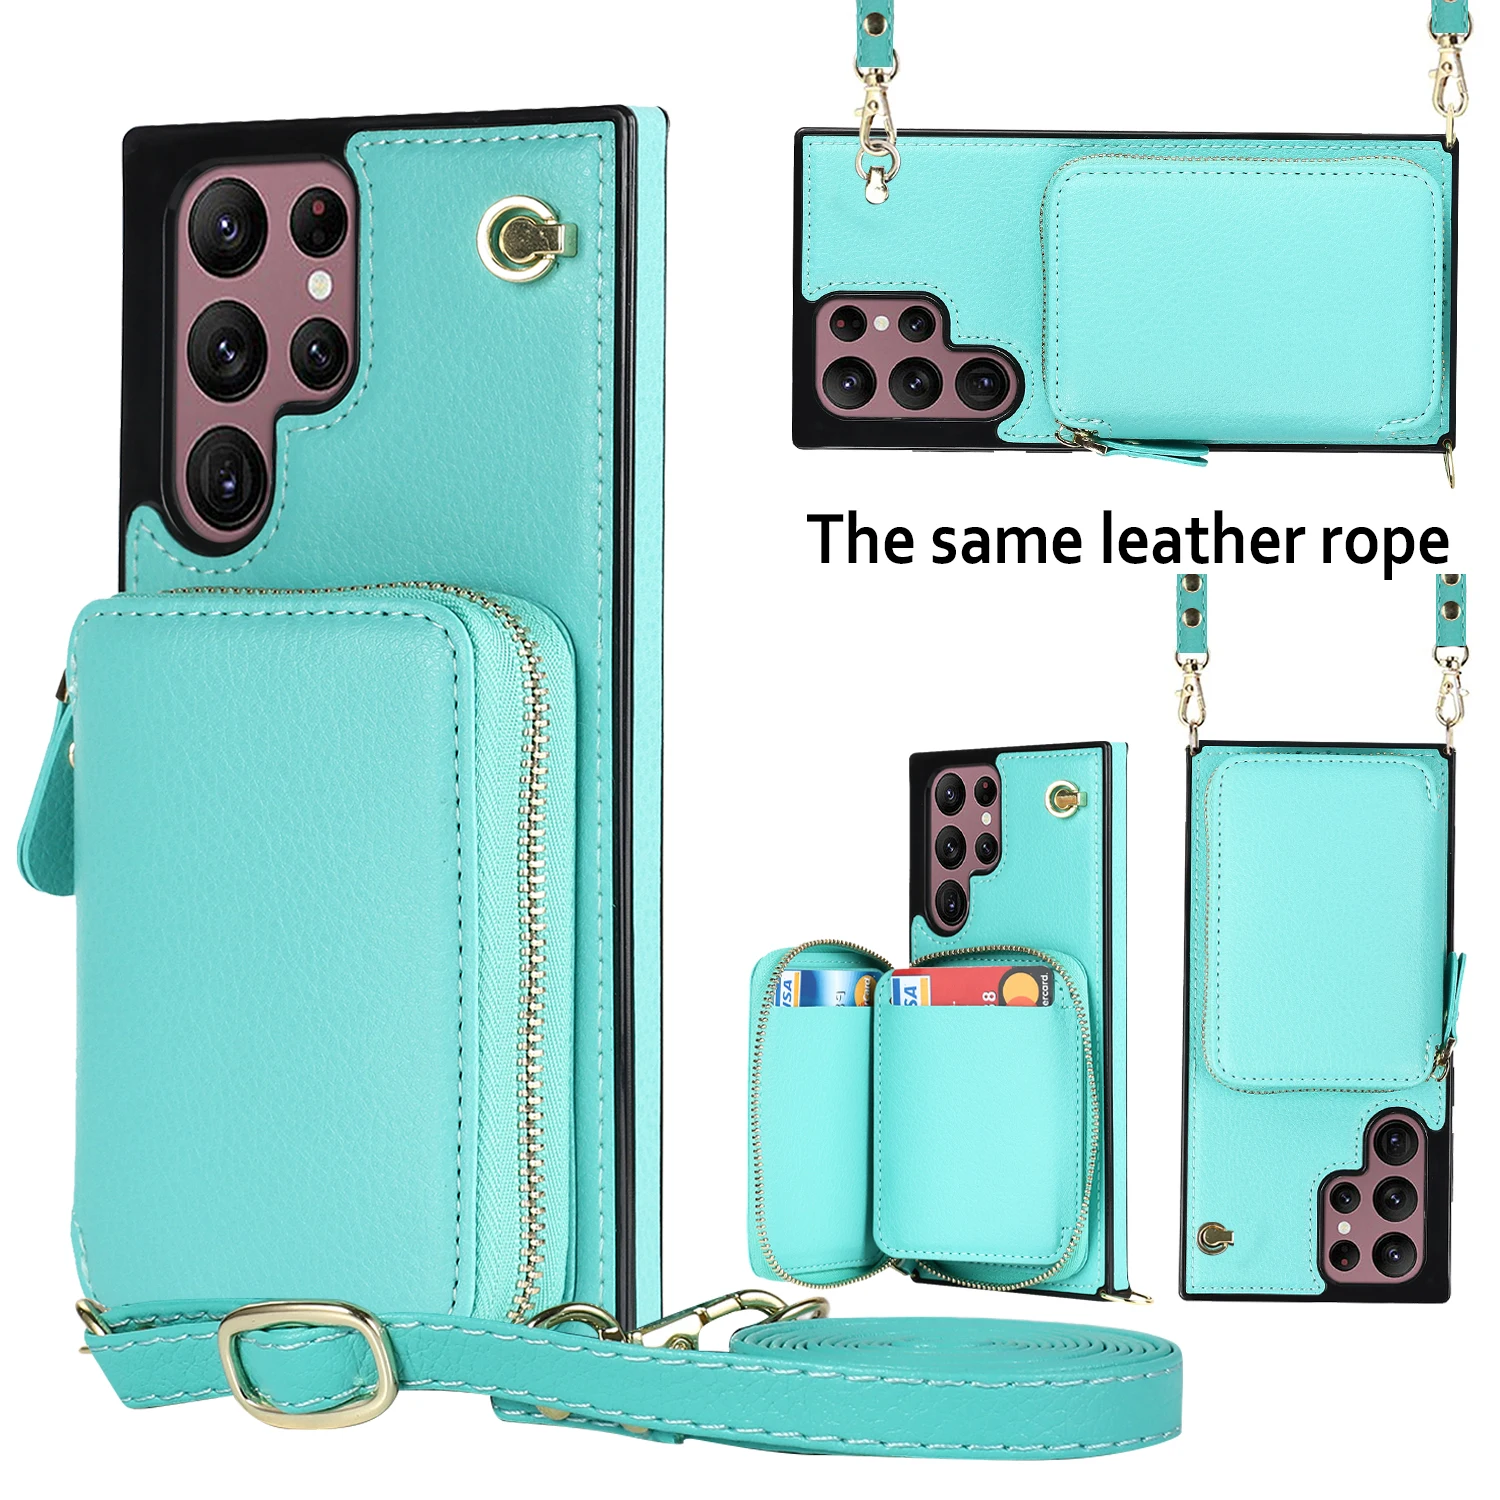 Solid Color Zipper Wallet Phone Case For Samsung Galaxy Note10 S20 21 22 Plus Ultra FE With Card Holder Lanyard Strap Cover